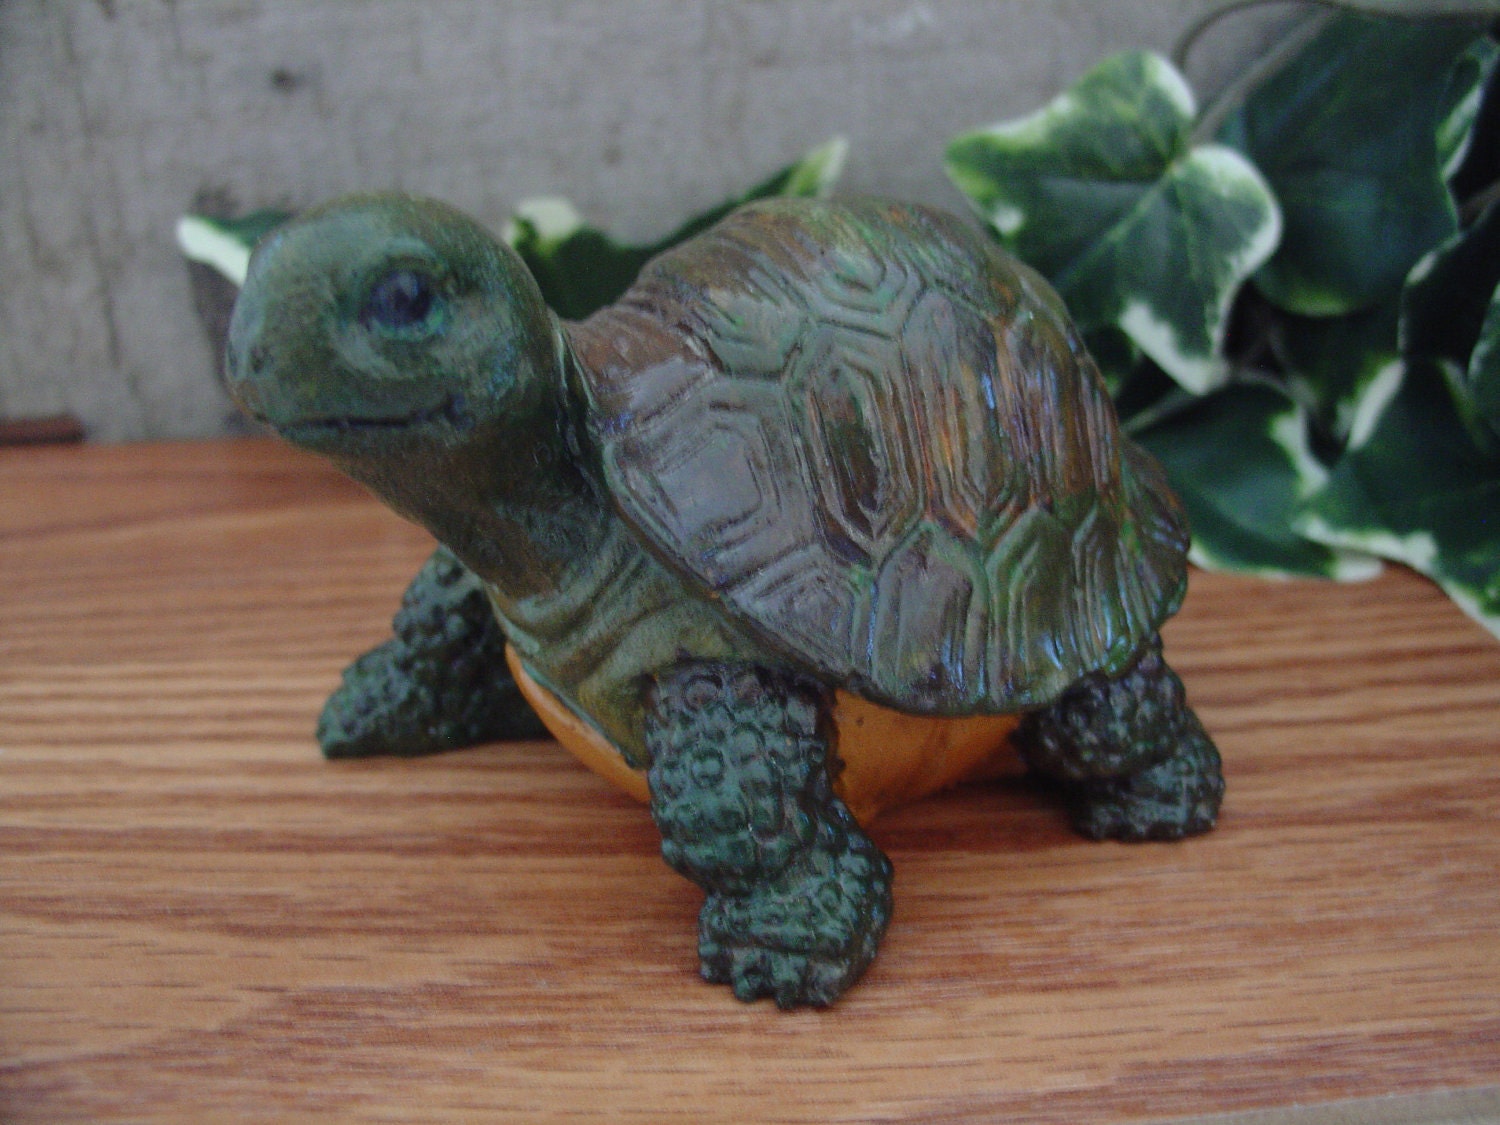 Turtle Cement Statue Figurine Indoor Outdoor by x10son on Etsy